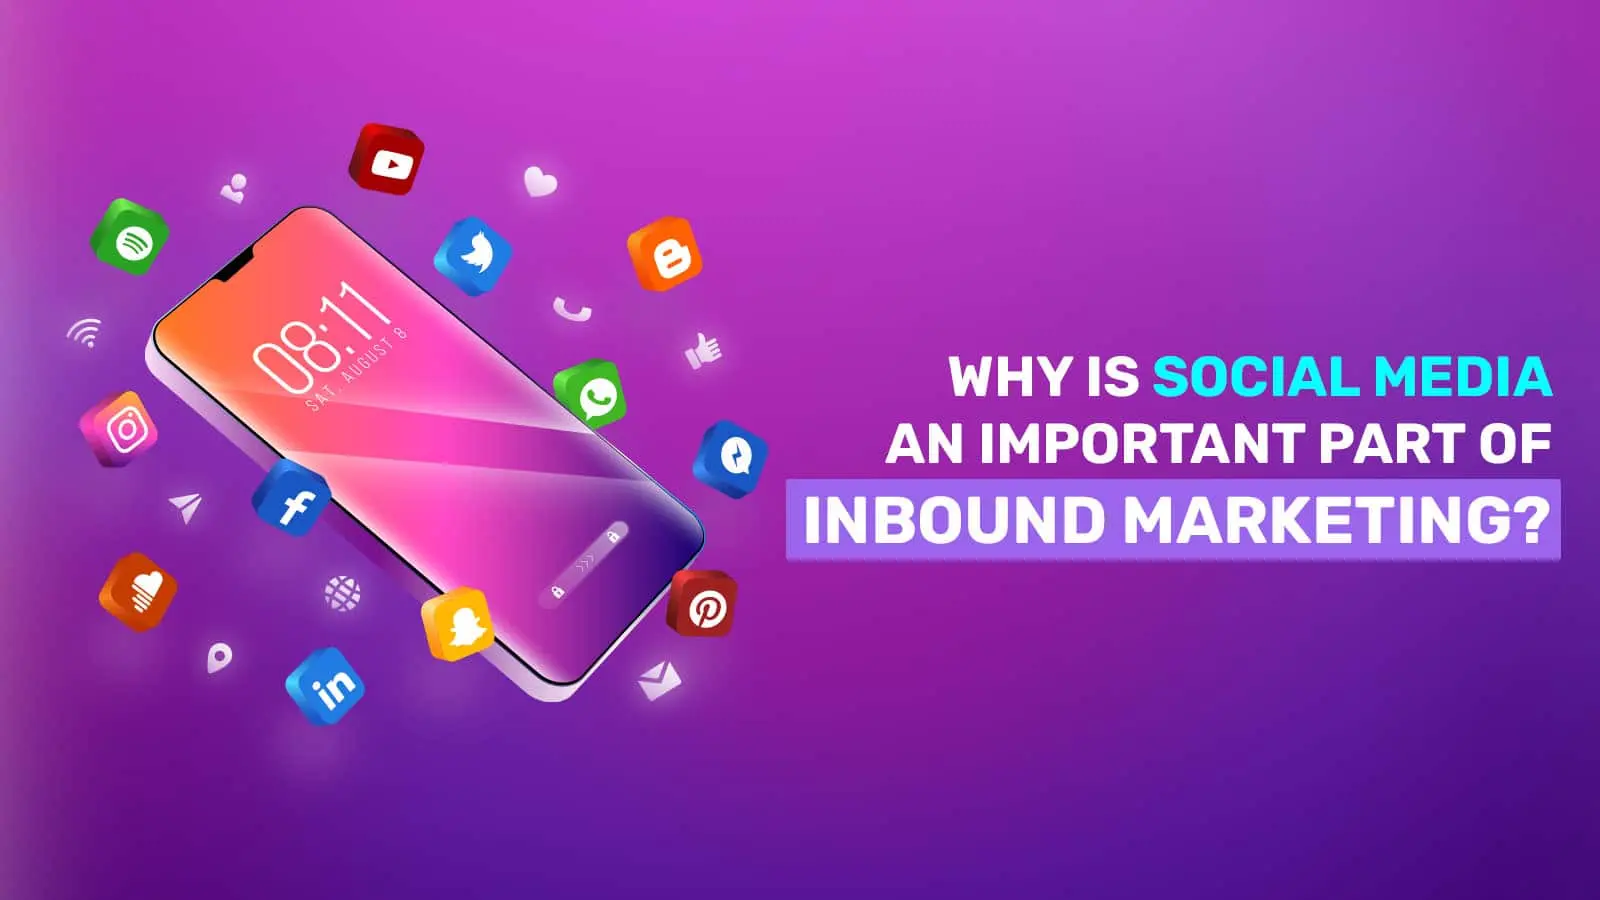 Why Is Social Media An Important Part of Inbound Marketing?